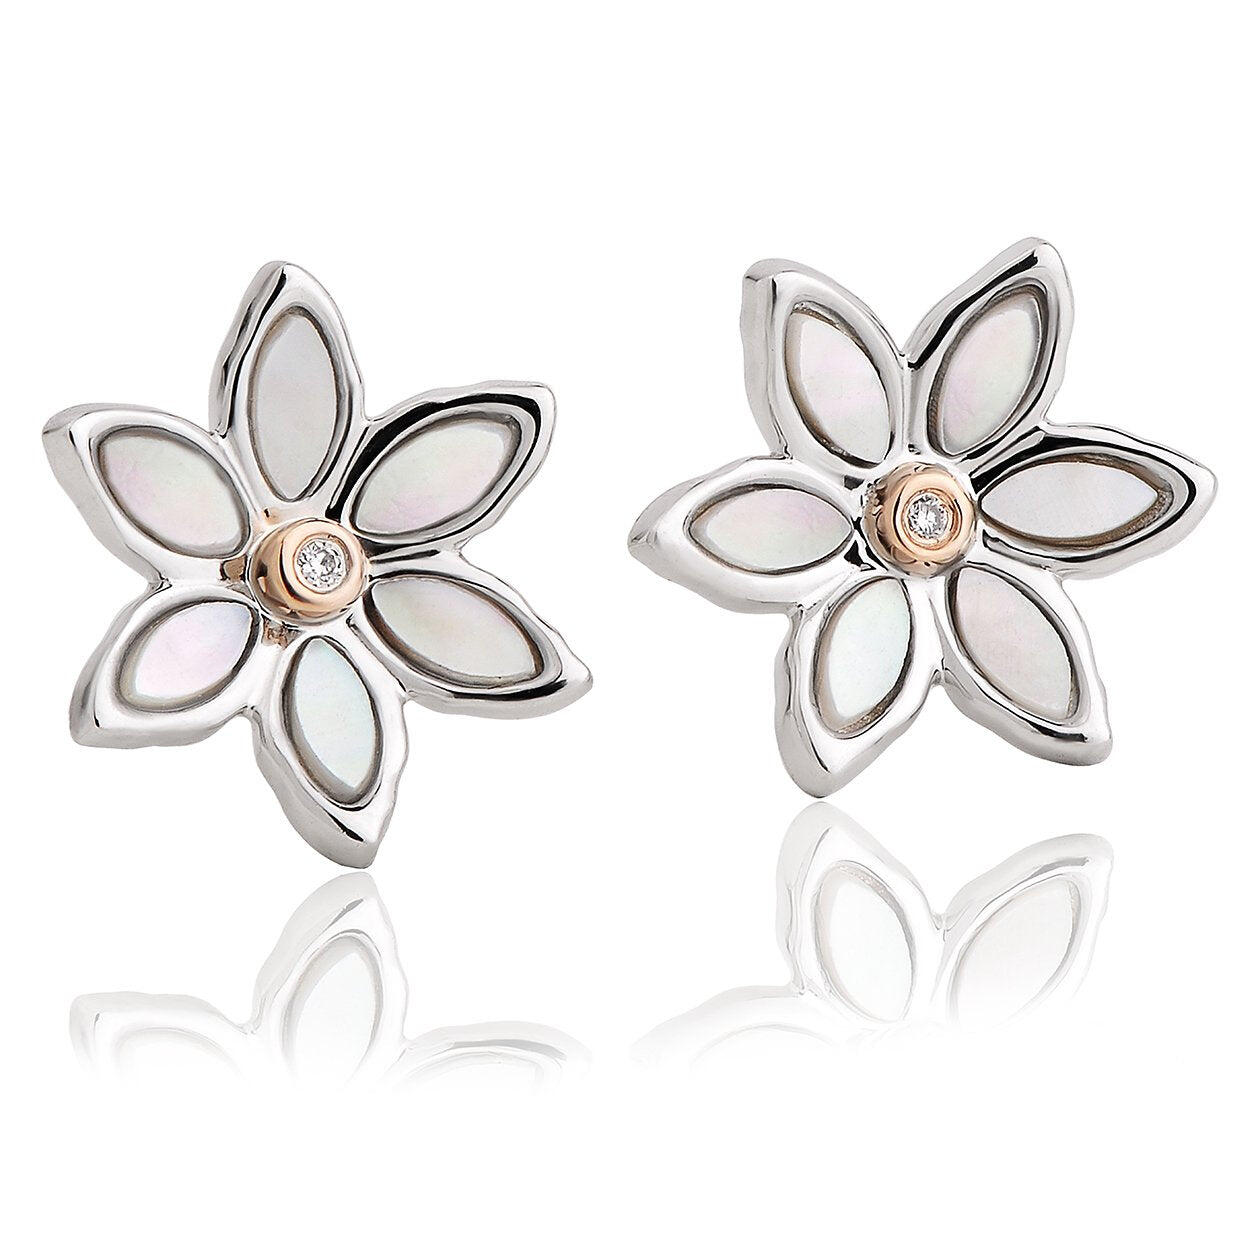 Clogau Lady Snowdon Sterling Silver Mother of Pearl Diamond Stud Earrings